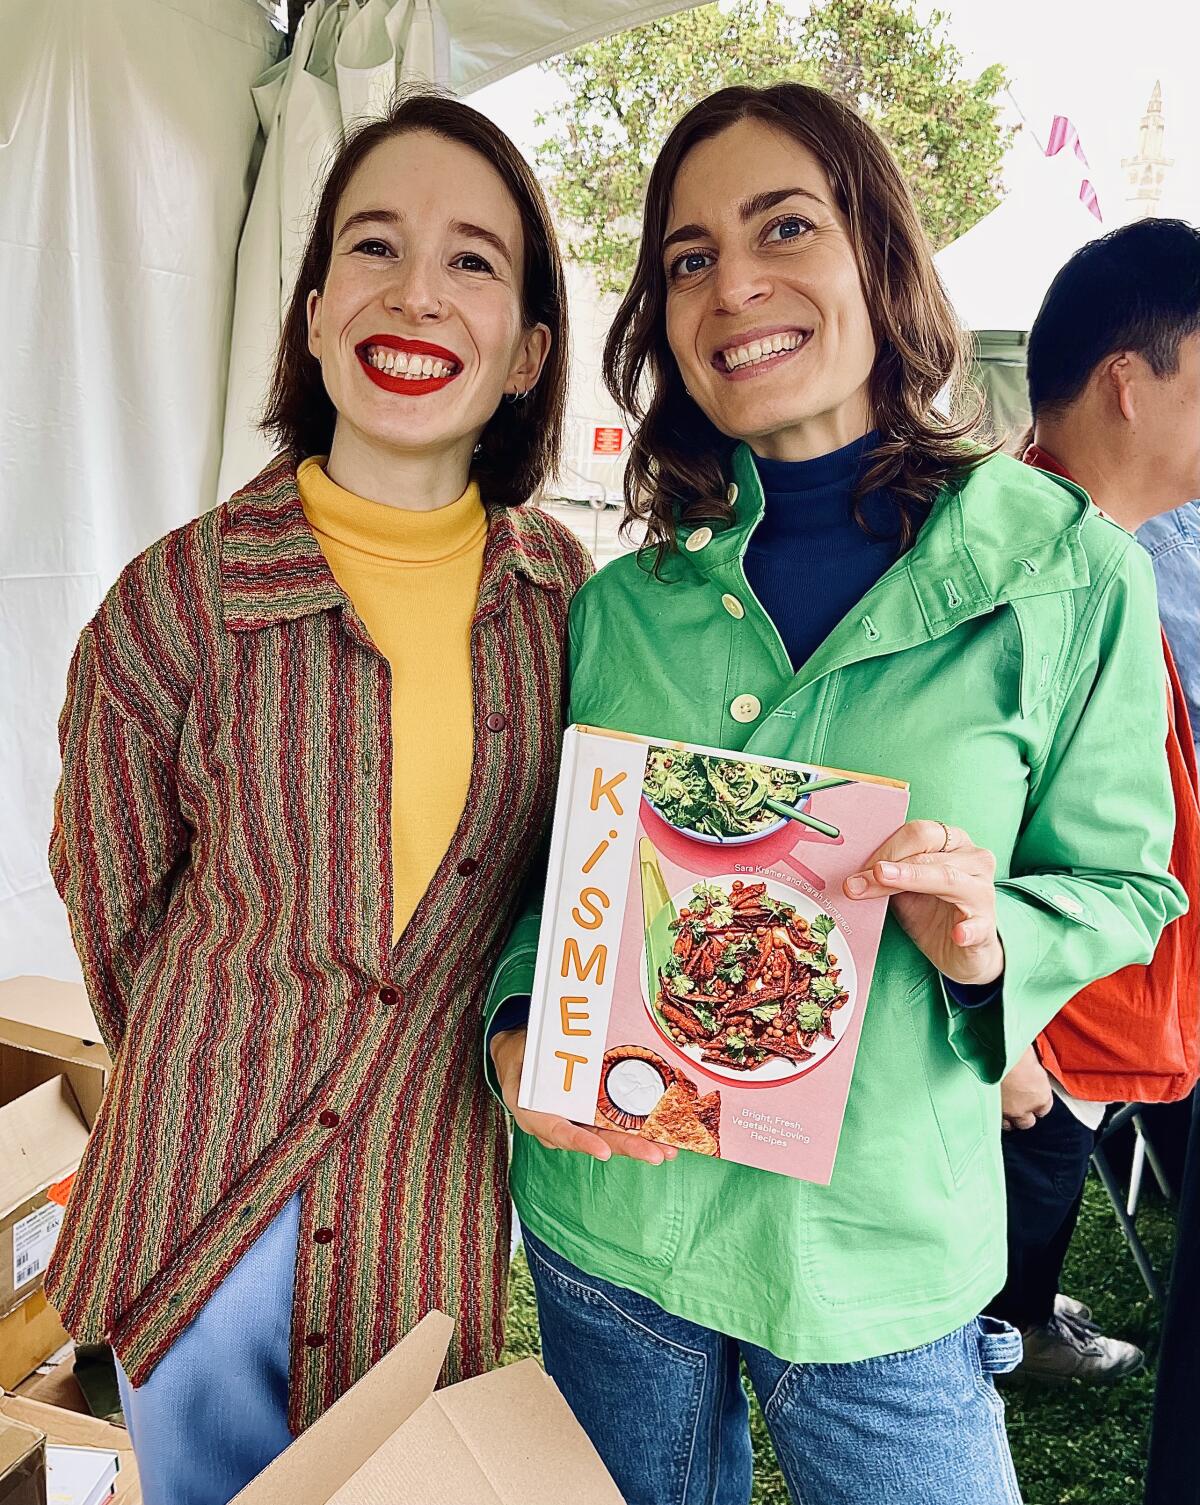 Kismet chefs and cookbook authors Sarah Hymanson, left, and Sara Kramer at the L.A. Times Festival of Books.